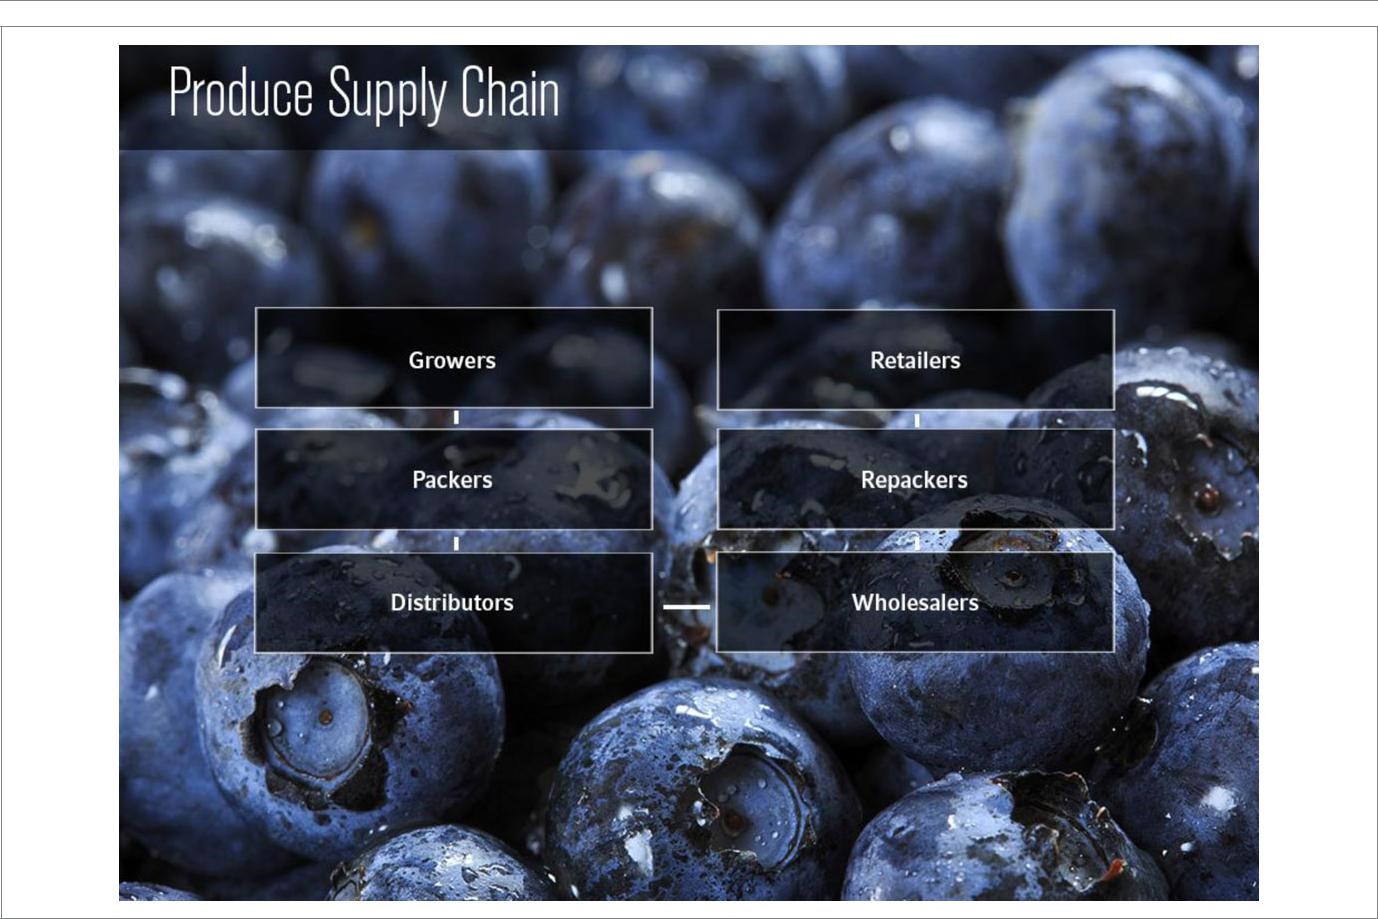 Stakeholders in a produce sector supply chain.